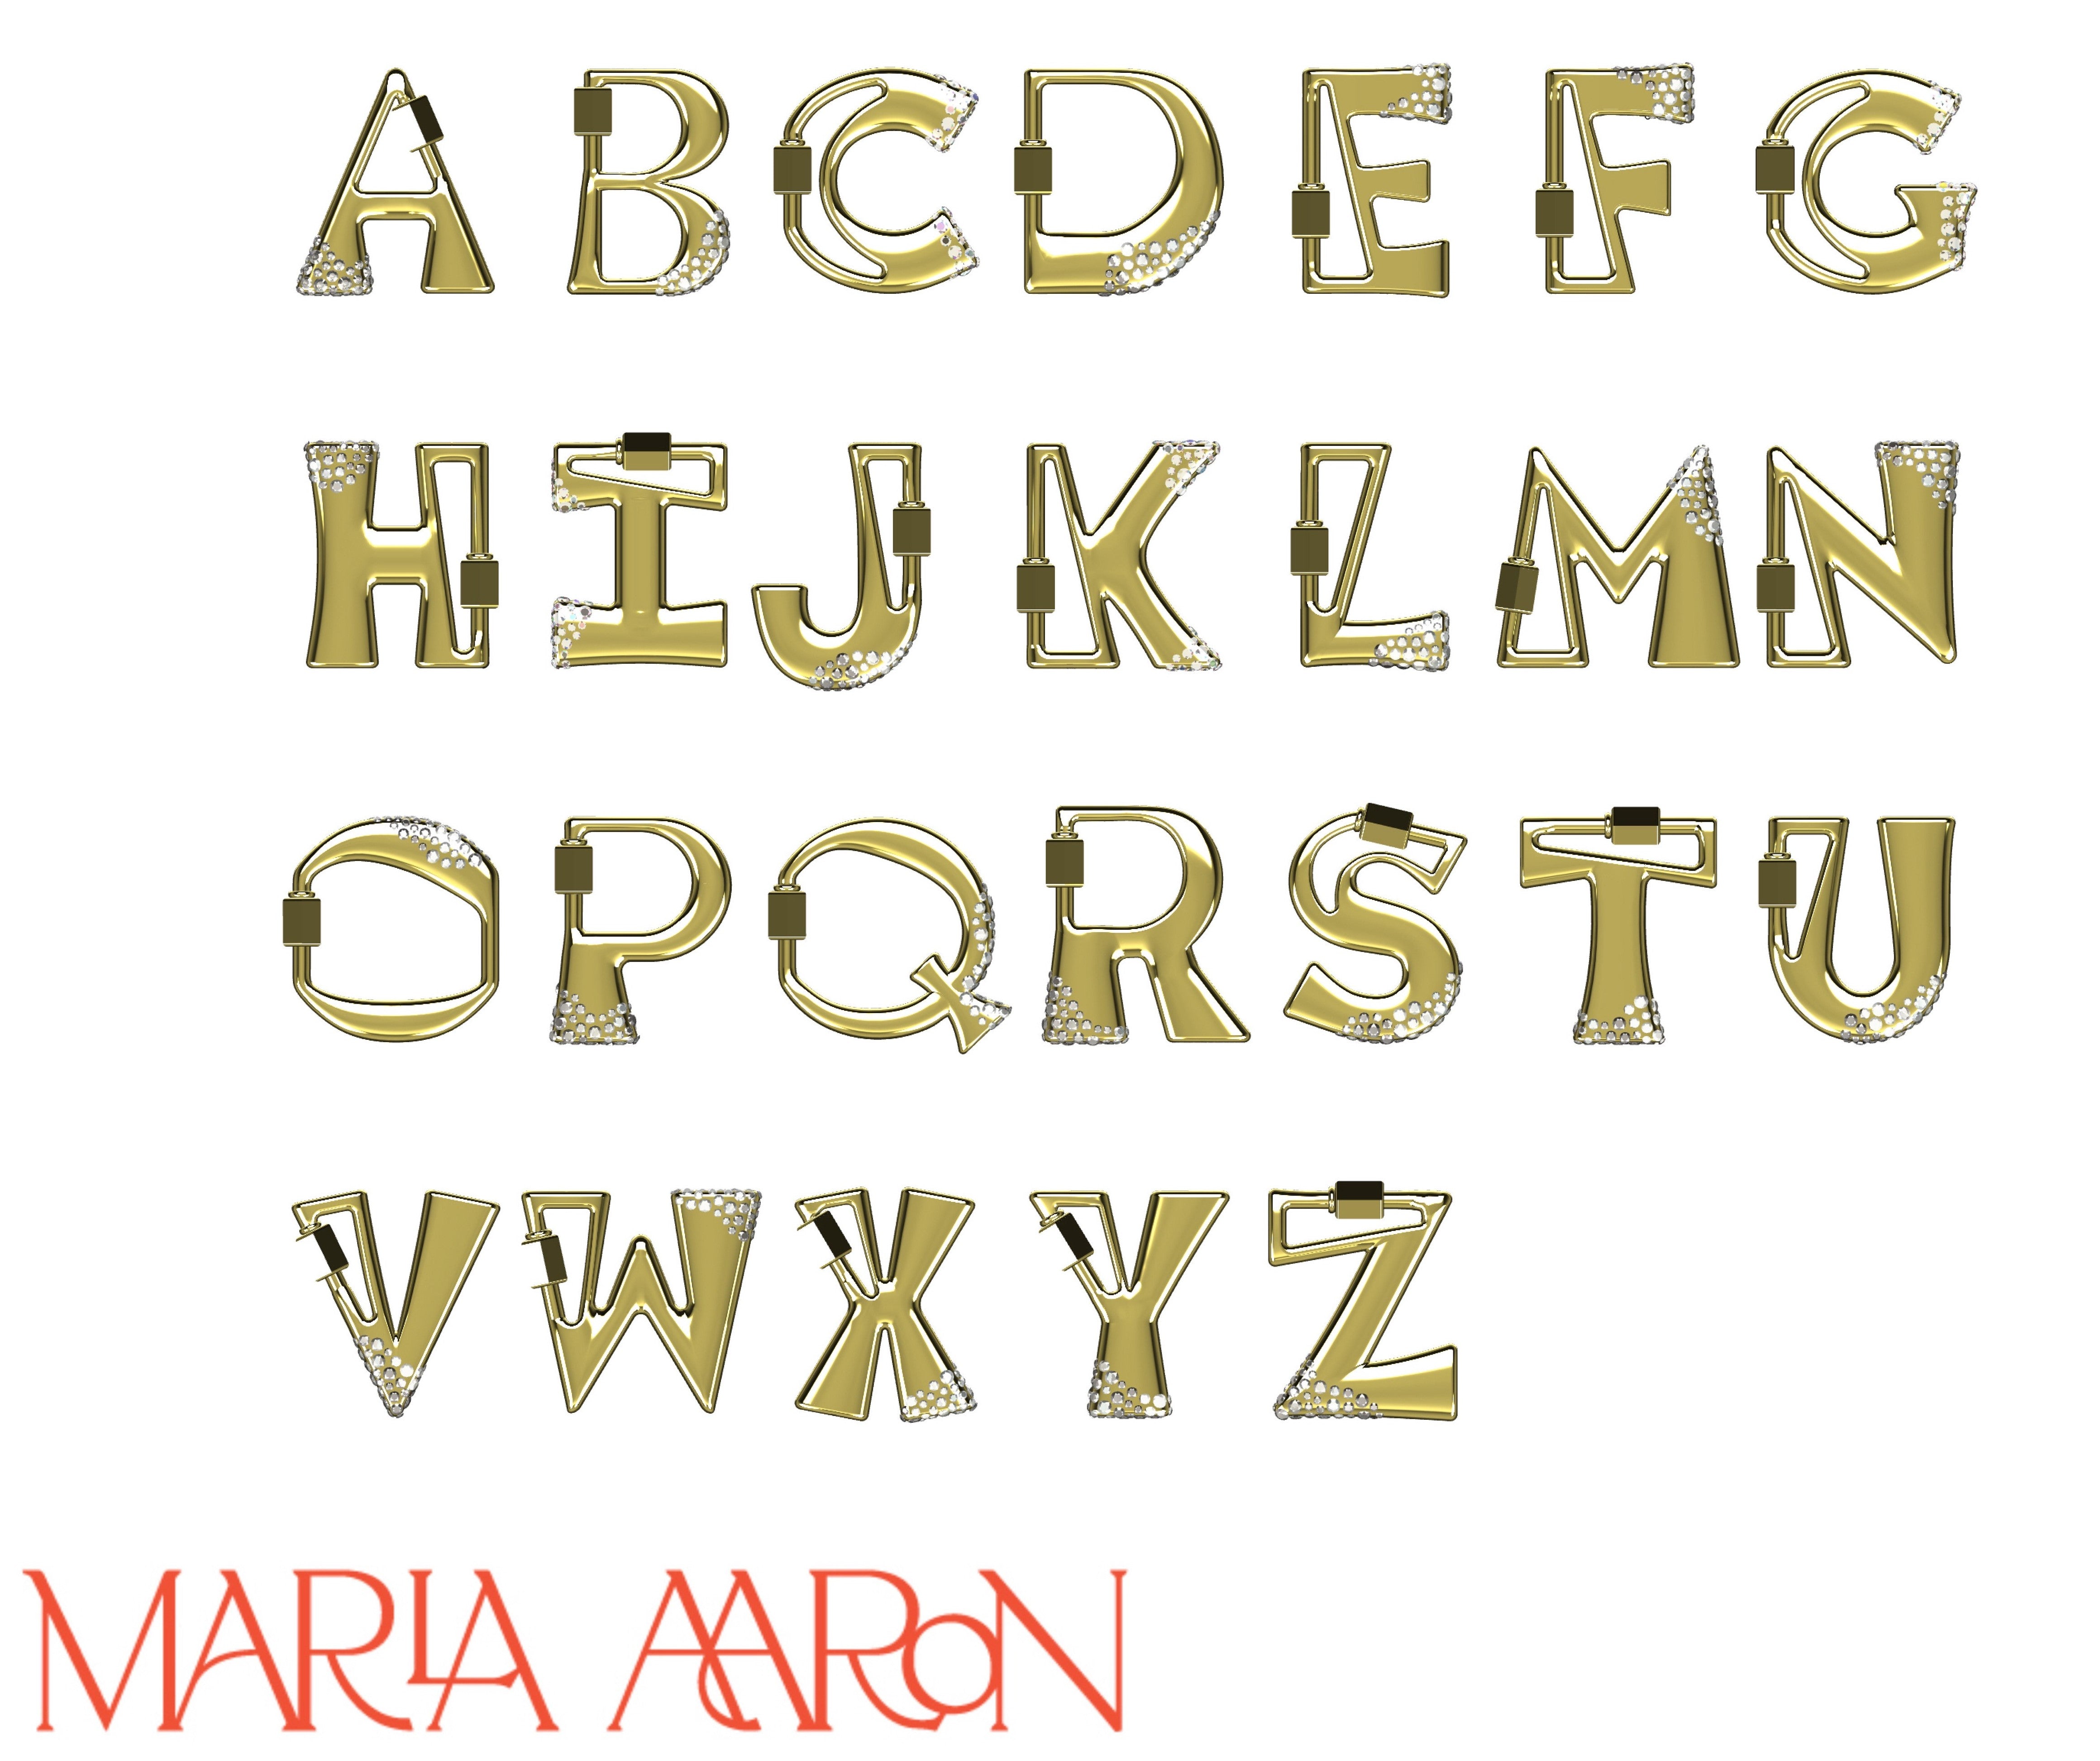 Gold locks of every letter of the alphabet including J charm against white backdrop with Marla Aaron logo in bottom left corner